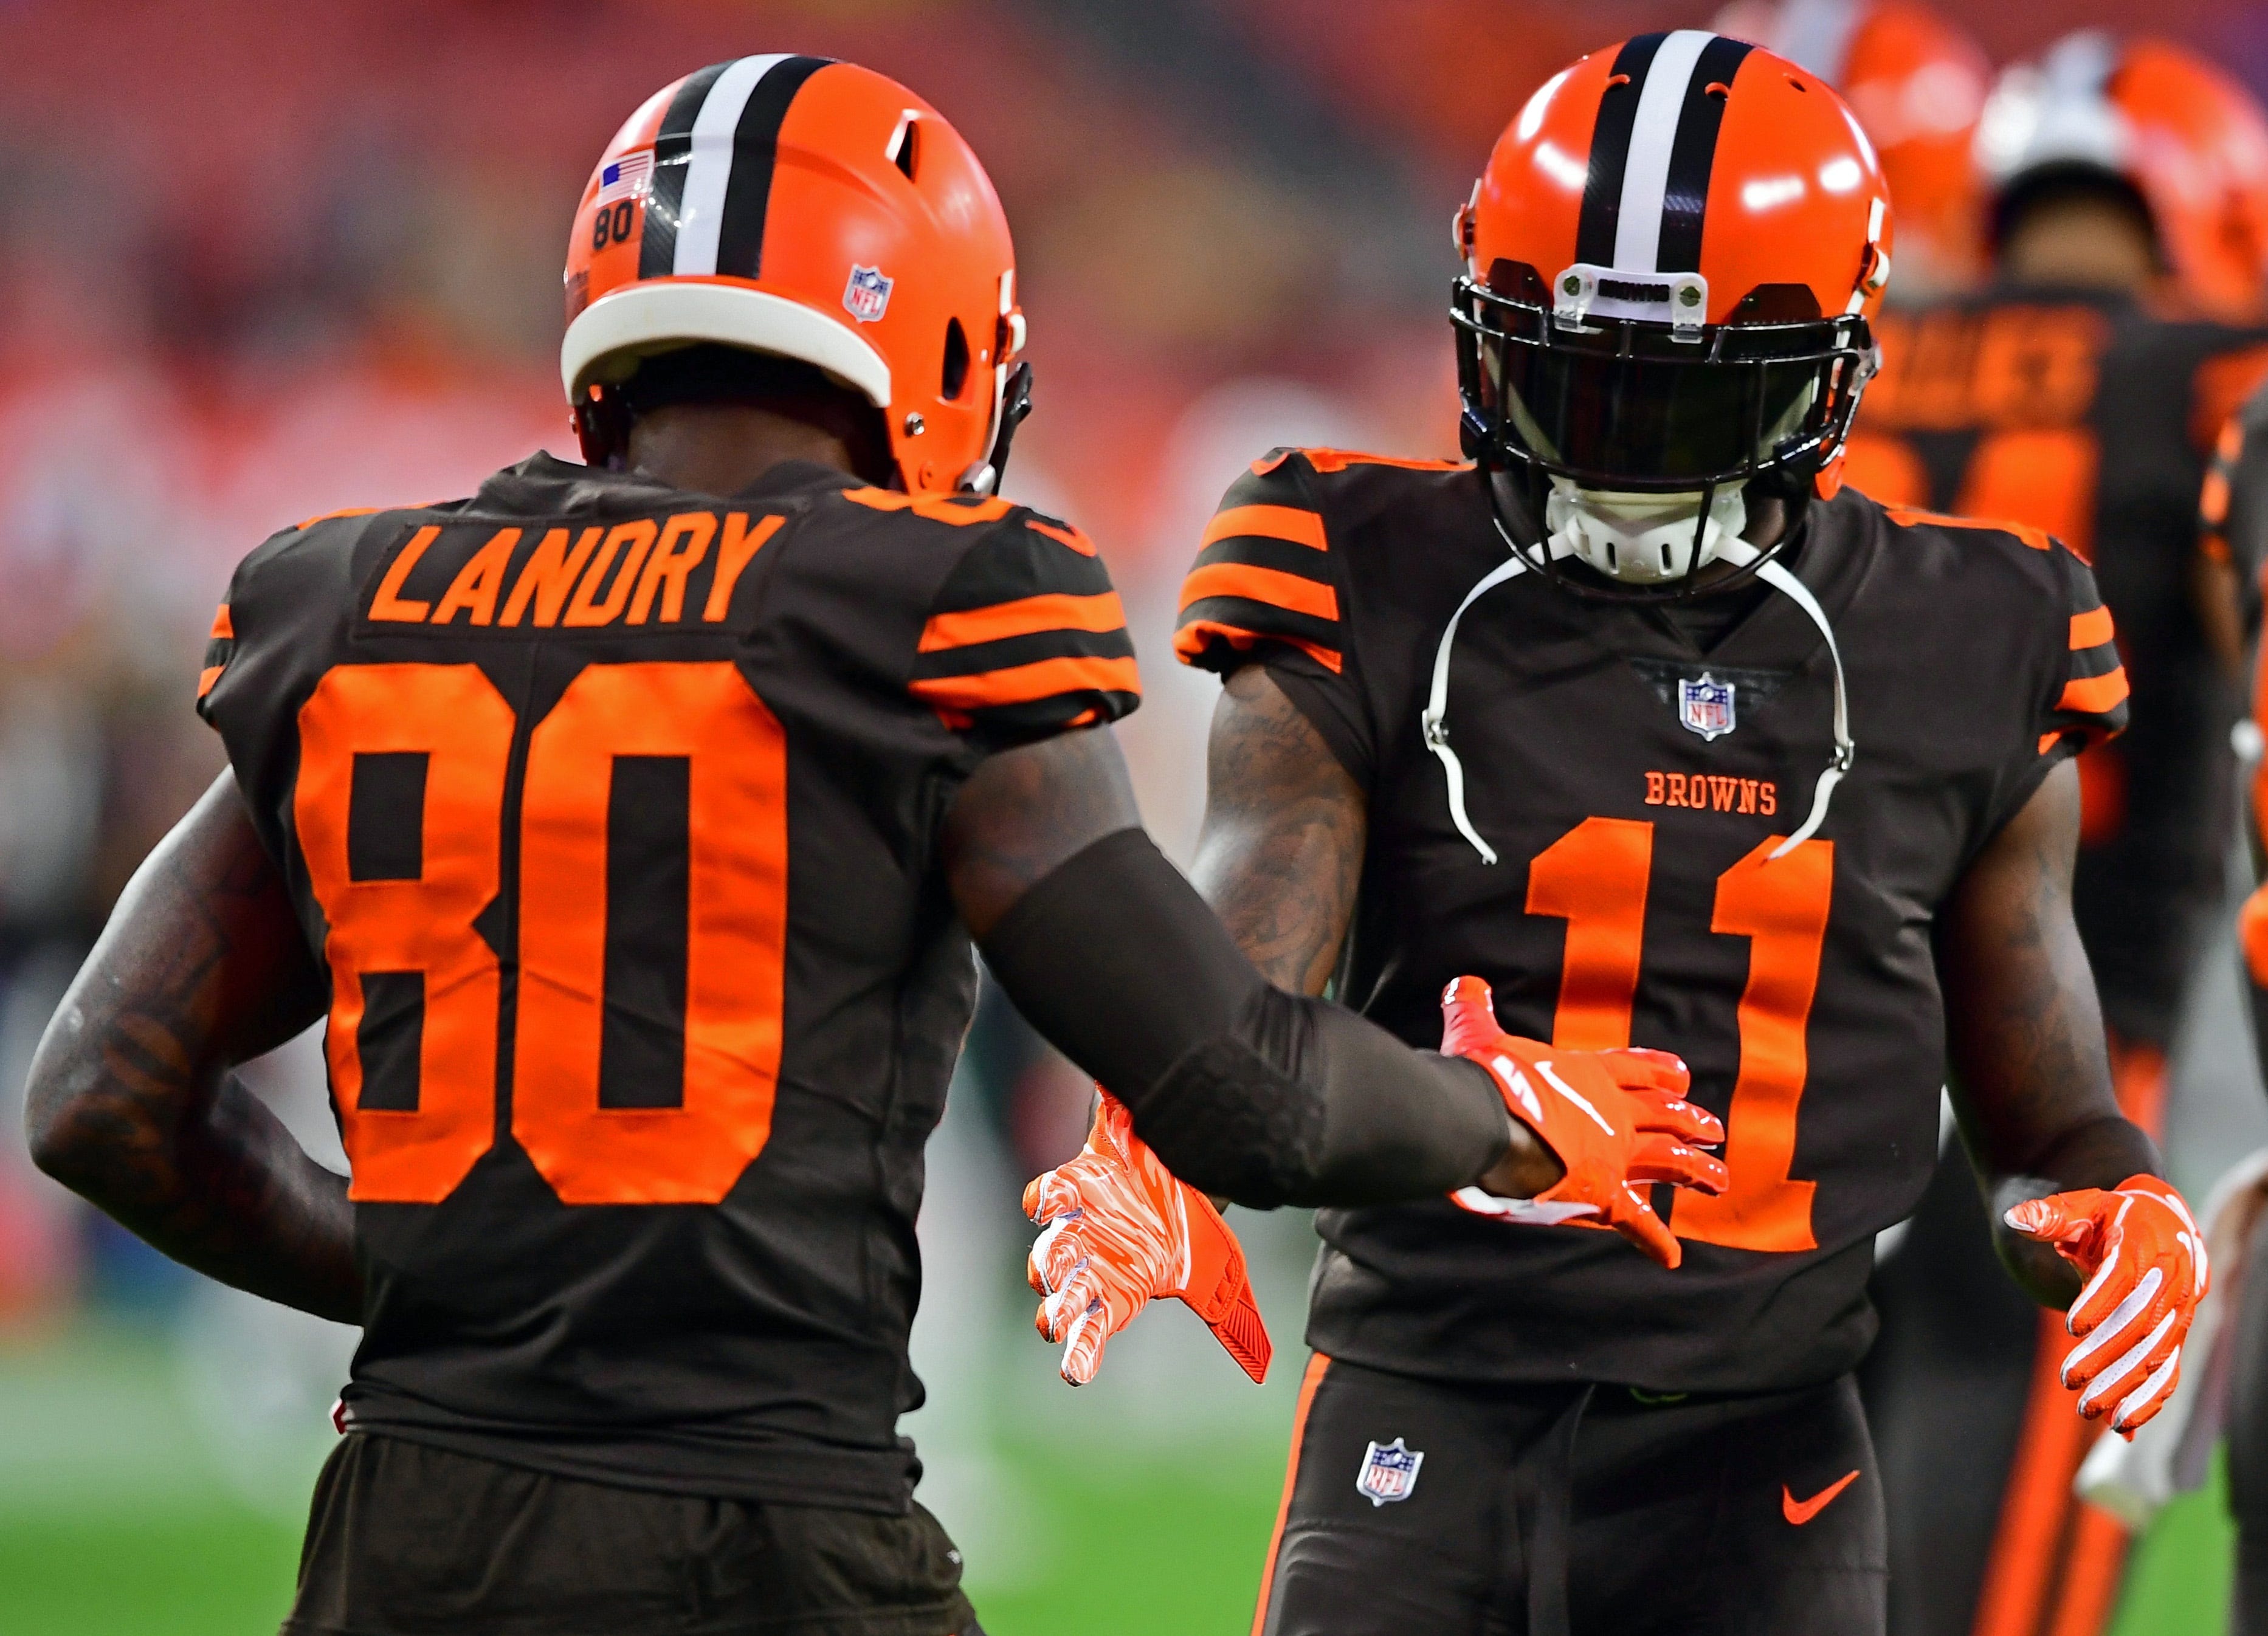 browns color rush 2020